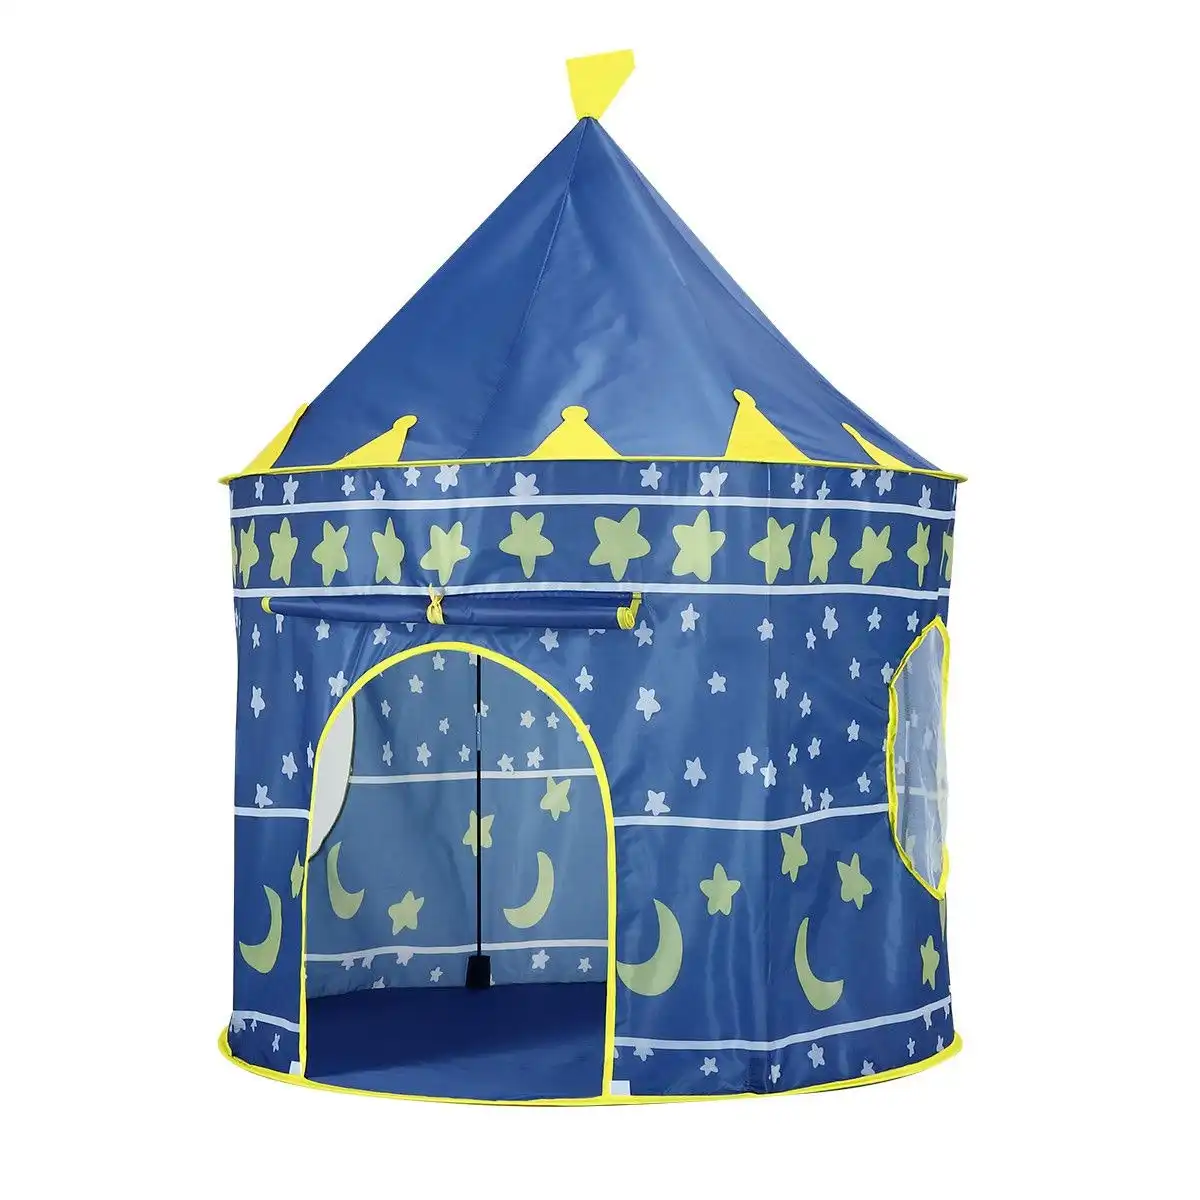 Ausway Castle Play Tent for Boys Girls Night-Sky Kids Play House Star Moon - Blue